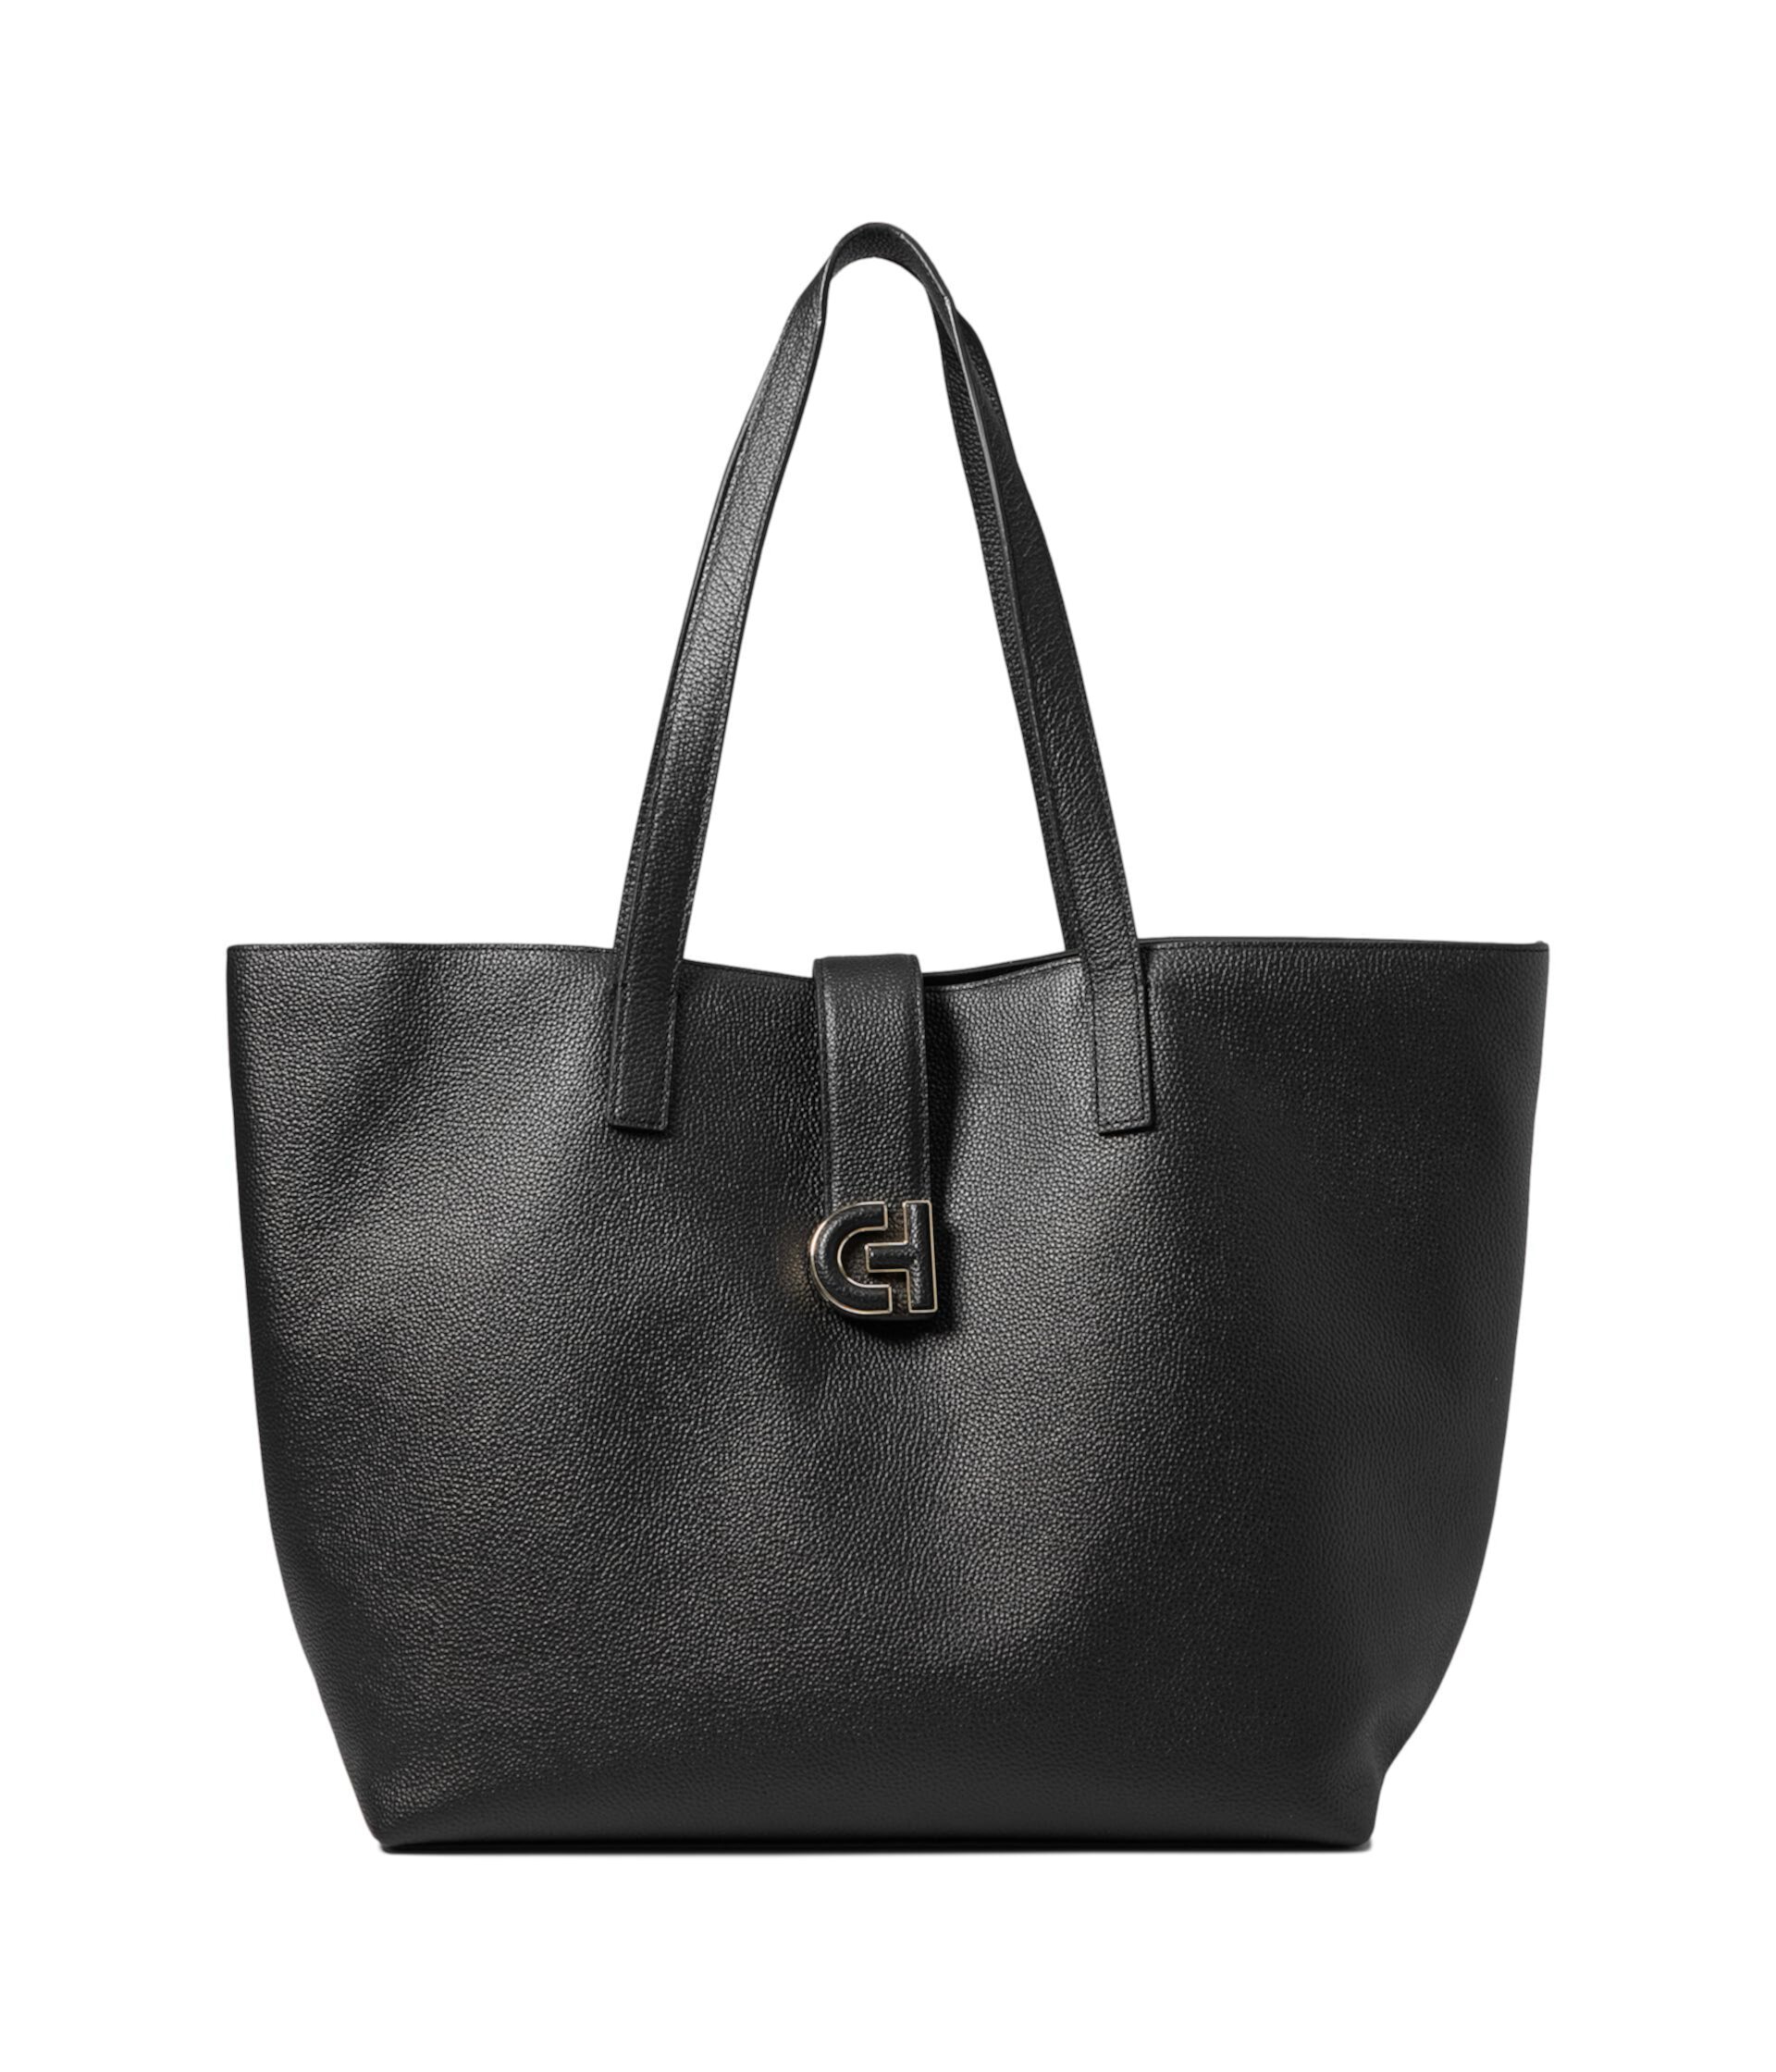 Simply Everything Tote Cole Haan